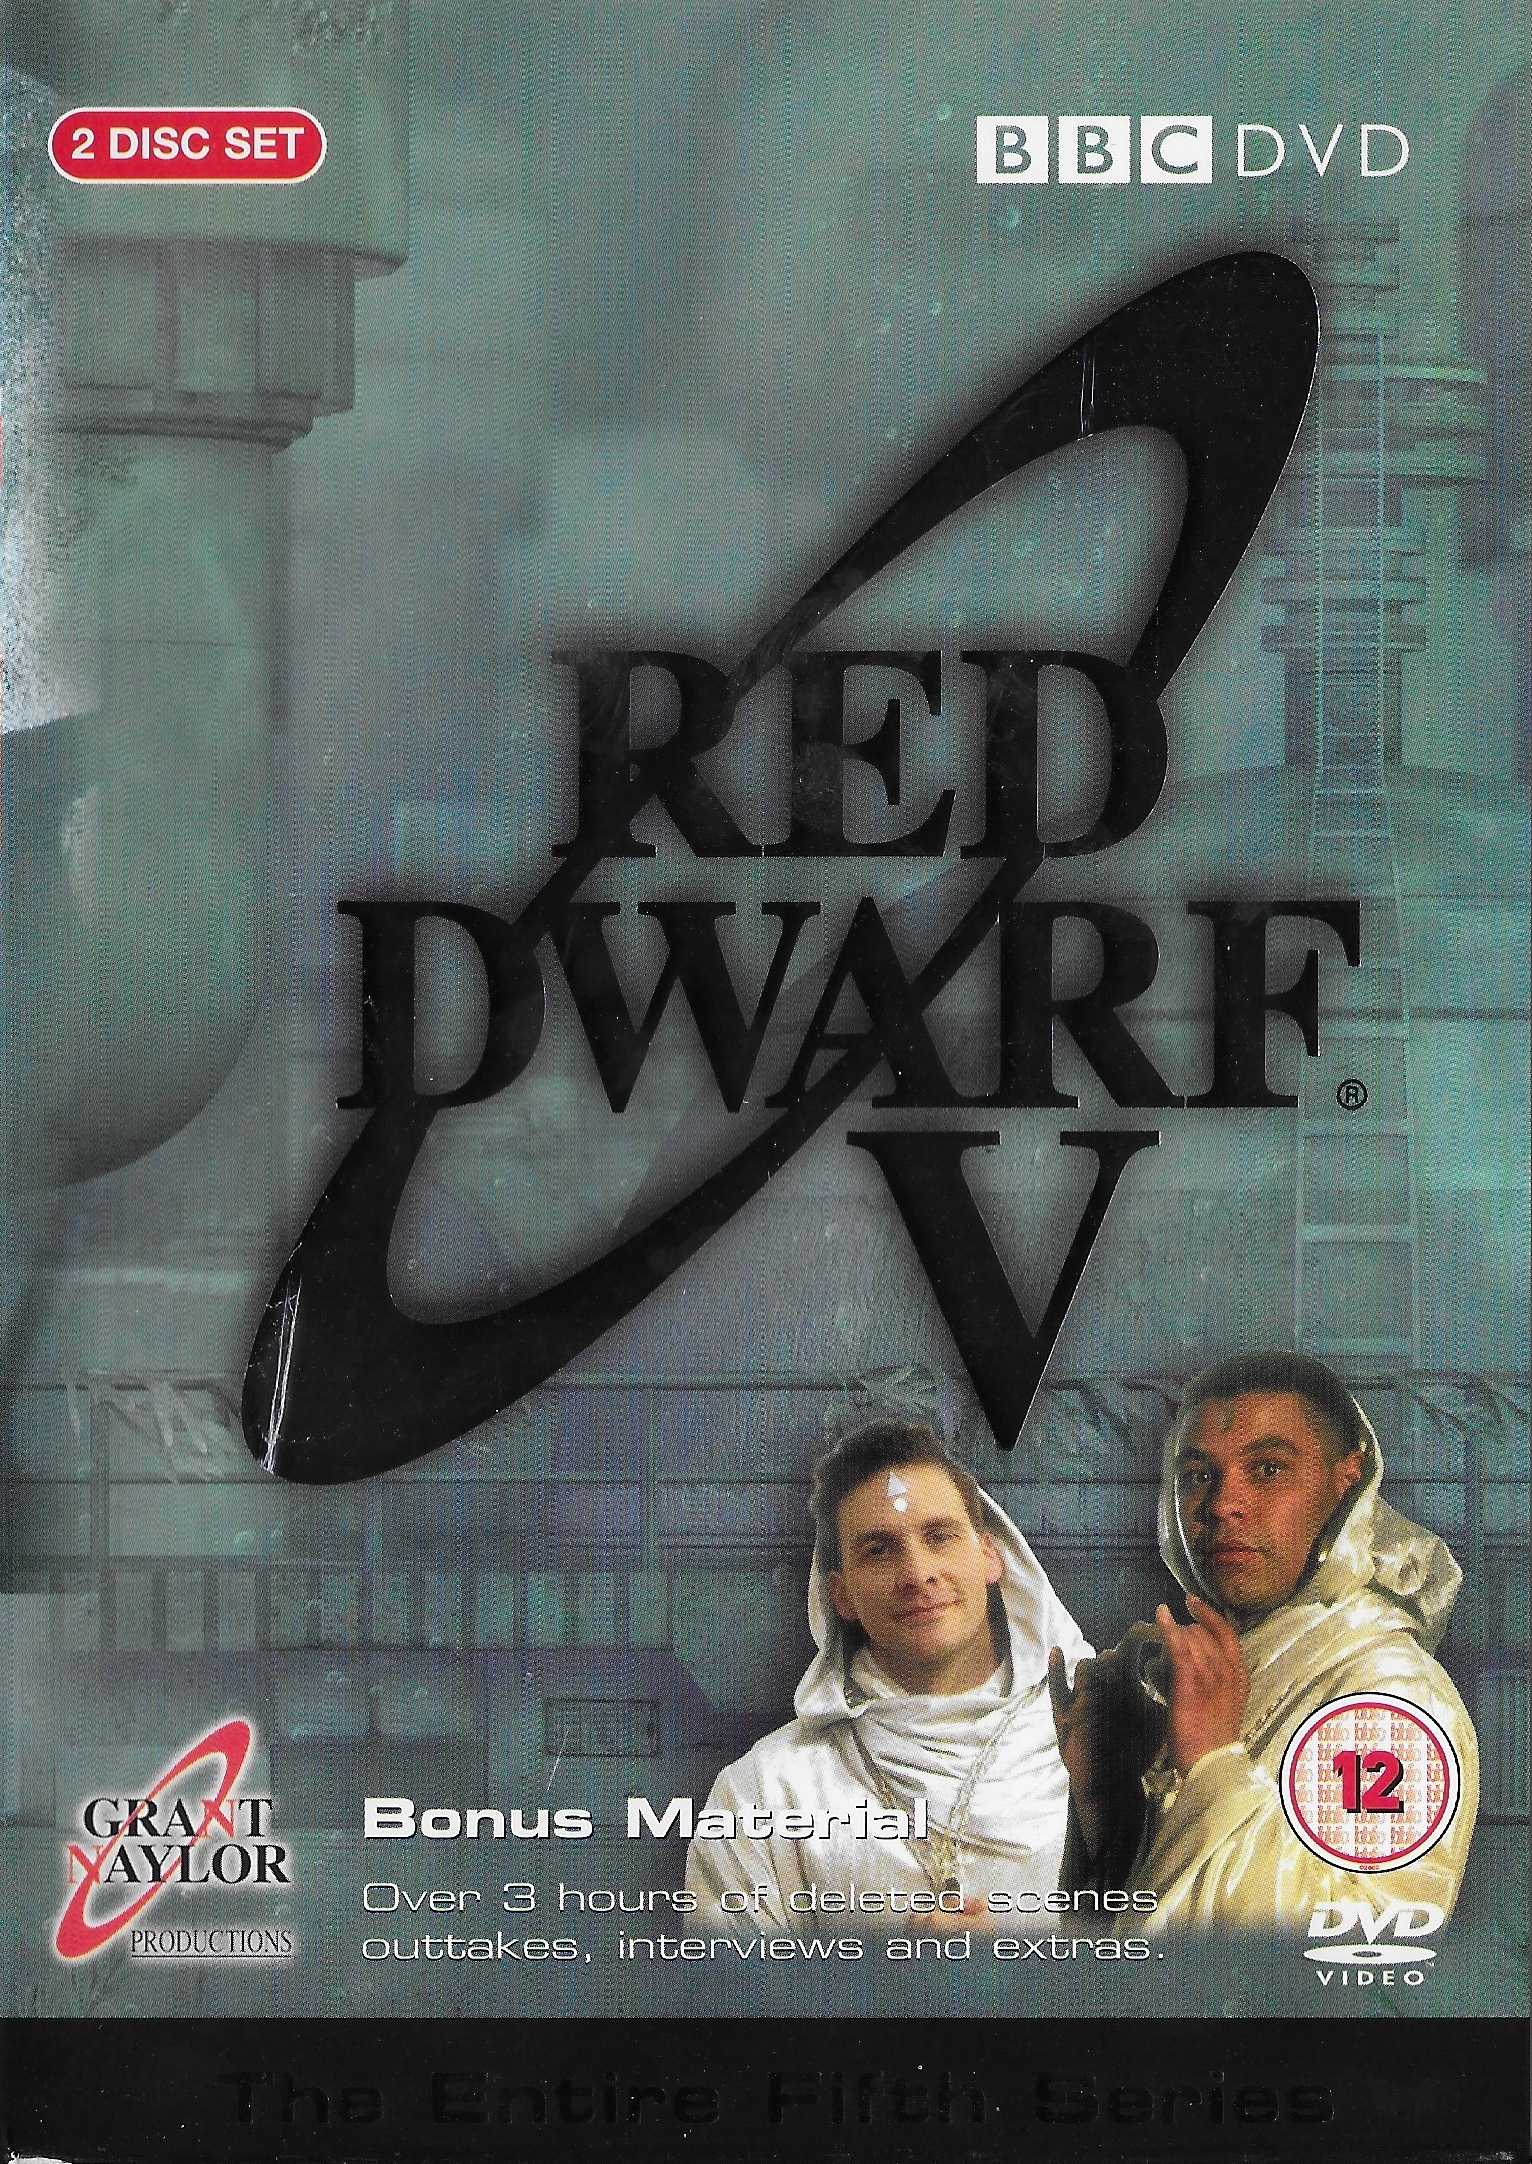 Picture of BBCDVD 1592 Red dwarf - Series V by artist Rob Grant / Doug Naylor from the BBC dvds - Records and Tapes library